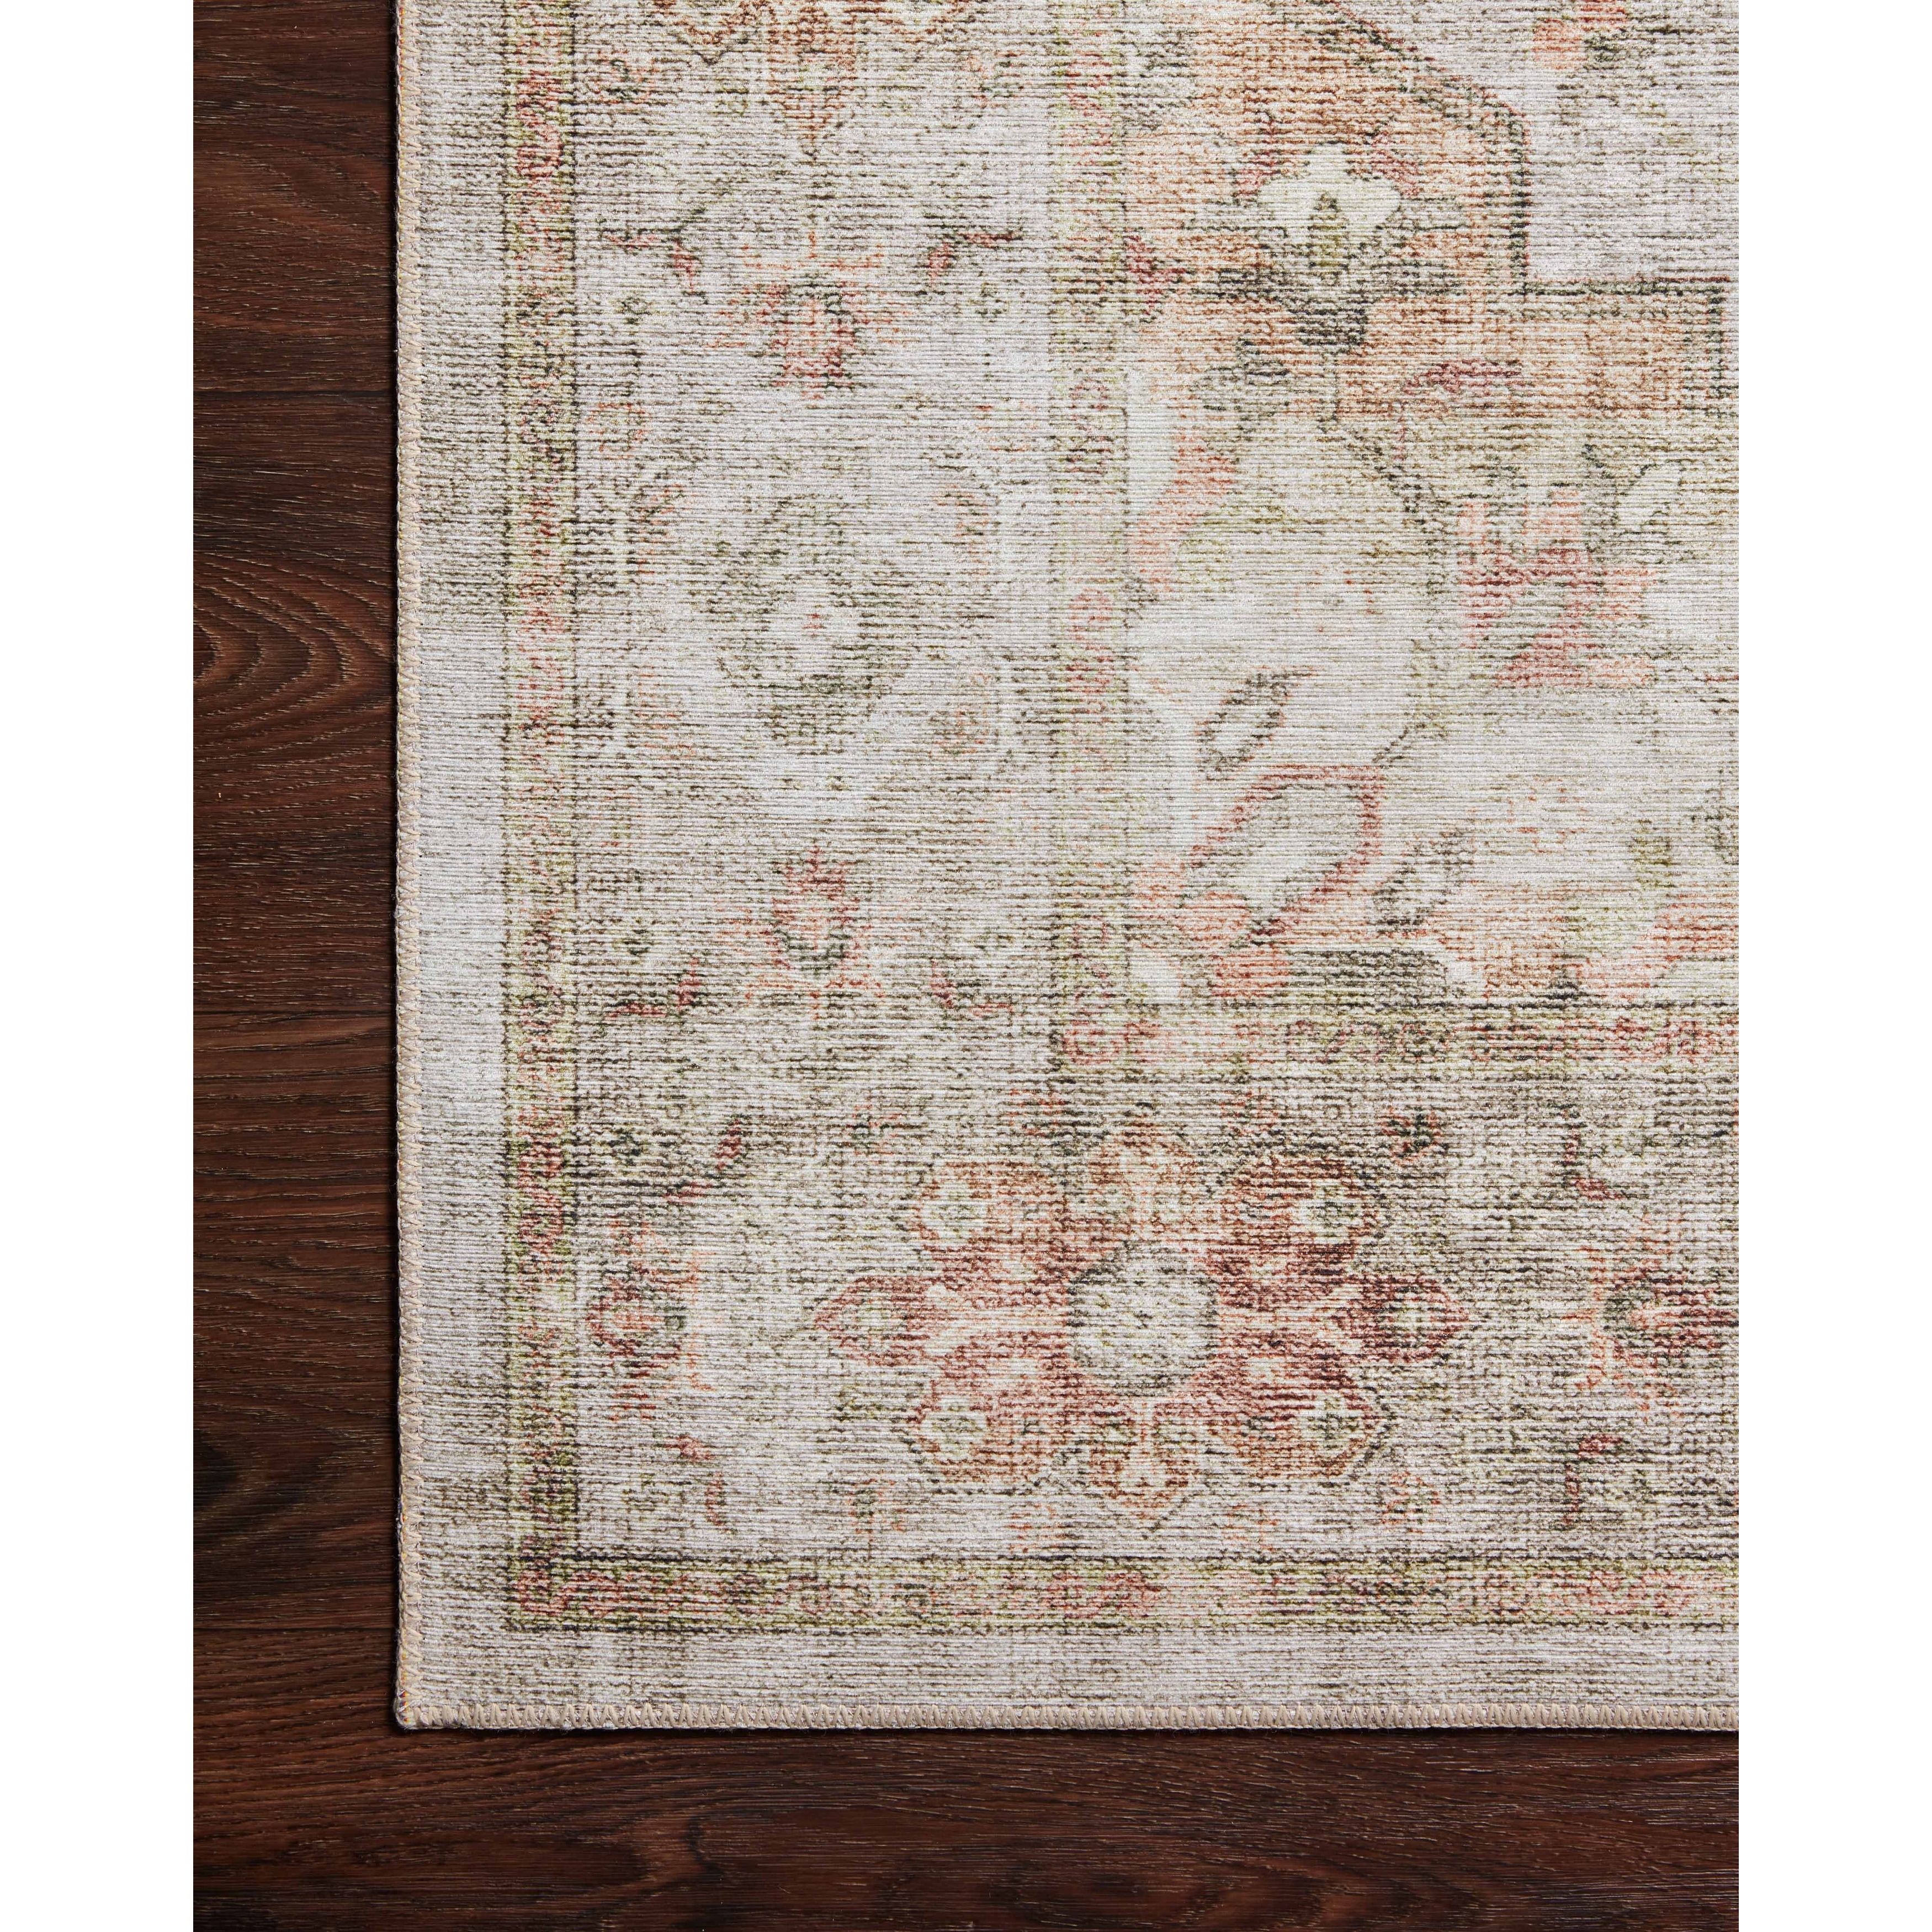 https://ak1.ostkcdn.com/images/products/is/images/direct/c8c1f11fd56a6b8c1ca614796a485d86826a2ada/Alexander-Home-Meghan-Vintage-Traditional-Distressed-Area-Rug.jpg